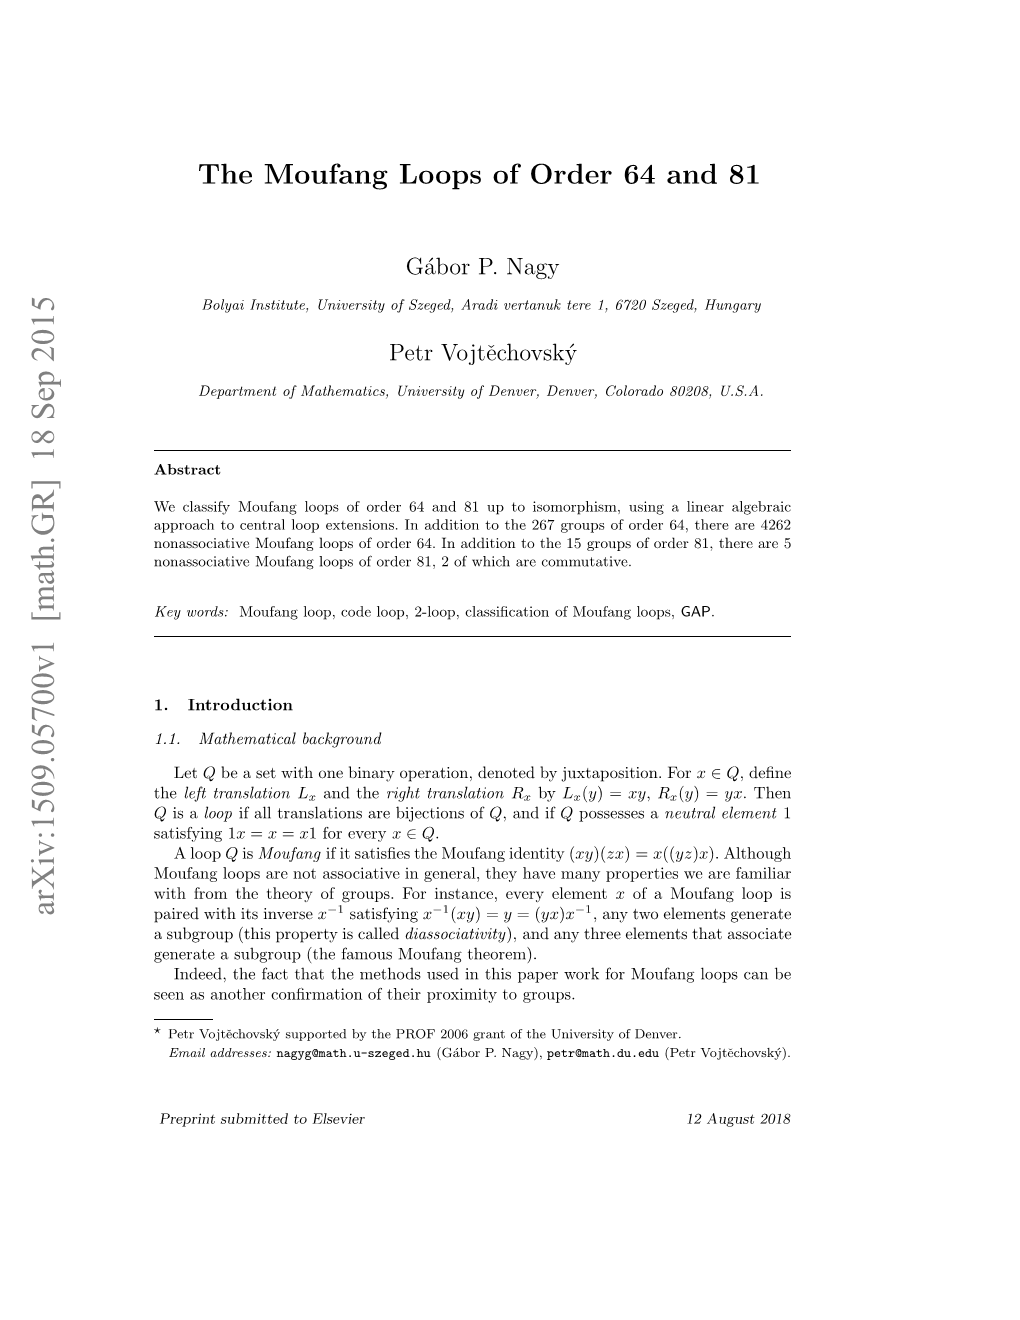 The Moufang Loops of Order 64 and 81